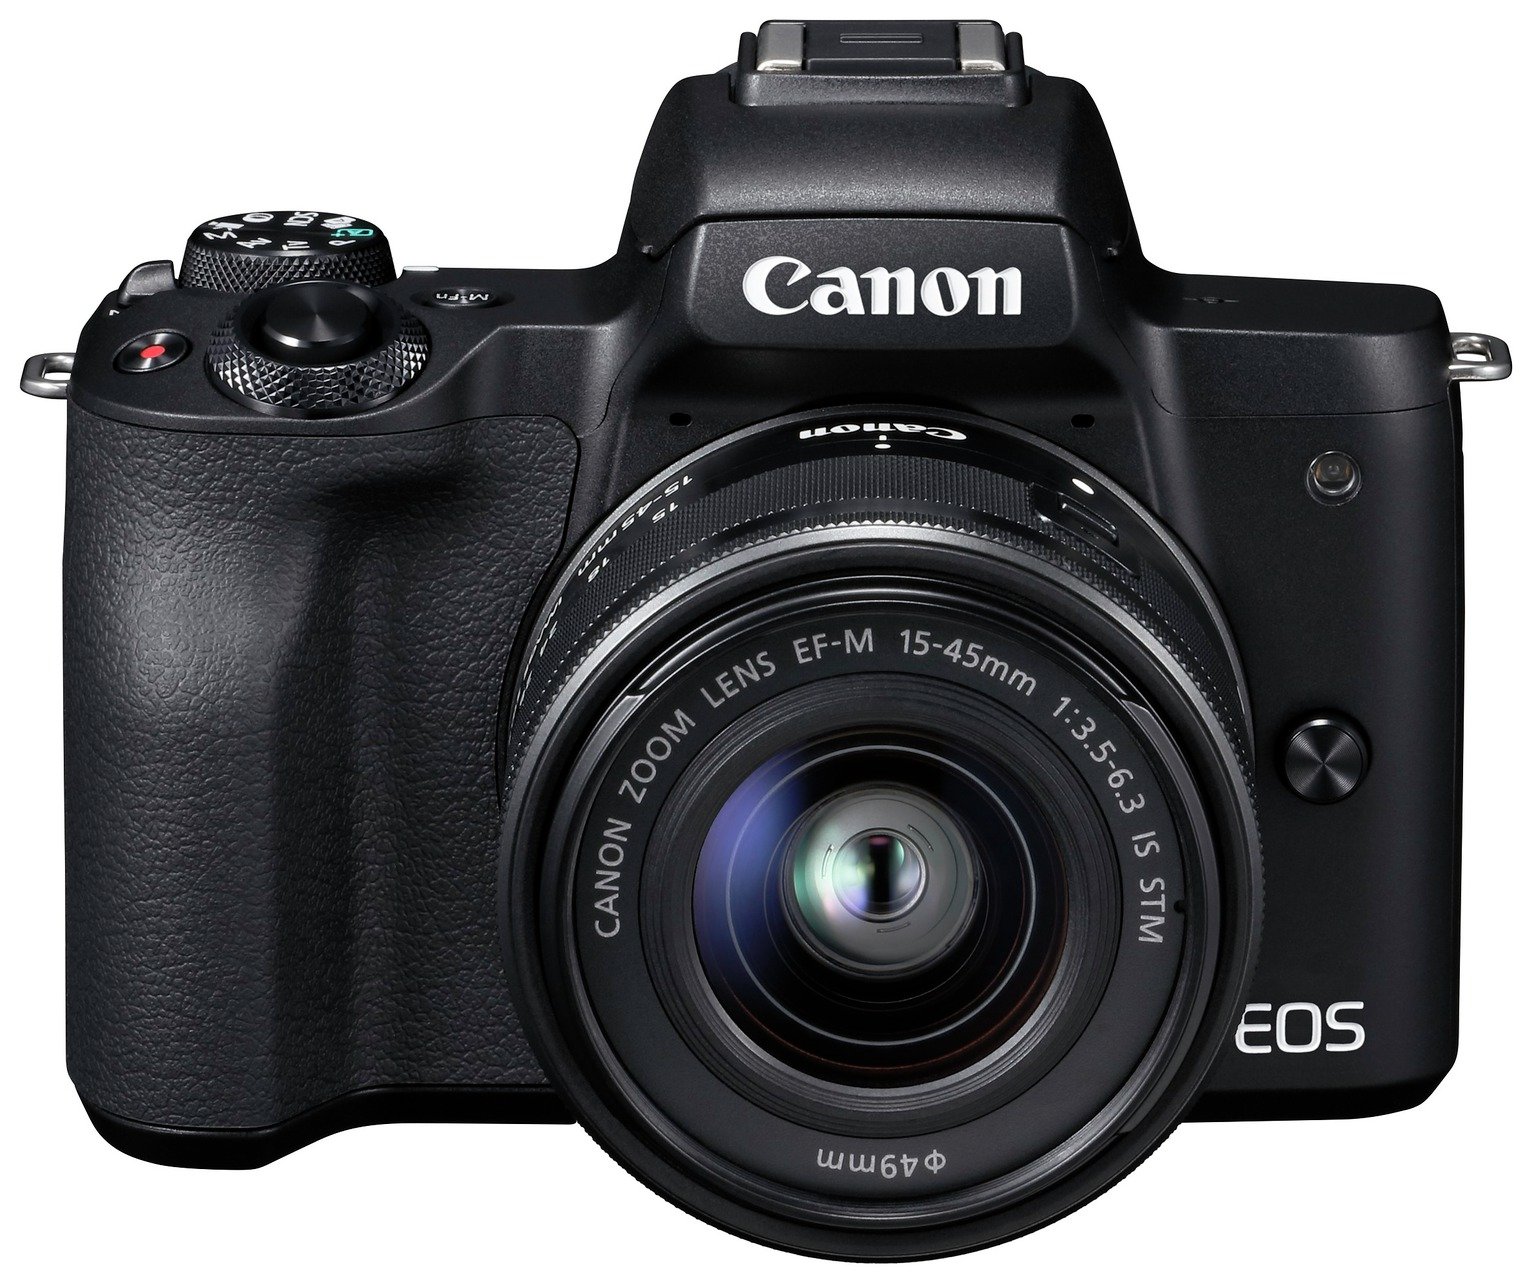 Canon EOS M50 Mirrorless Camera with 15-45mm Lens Review